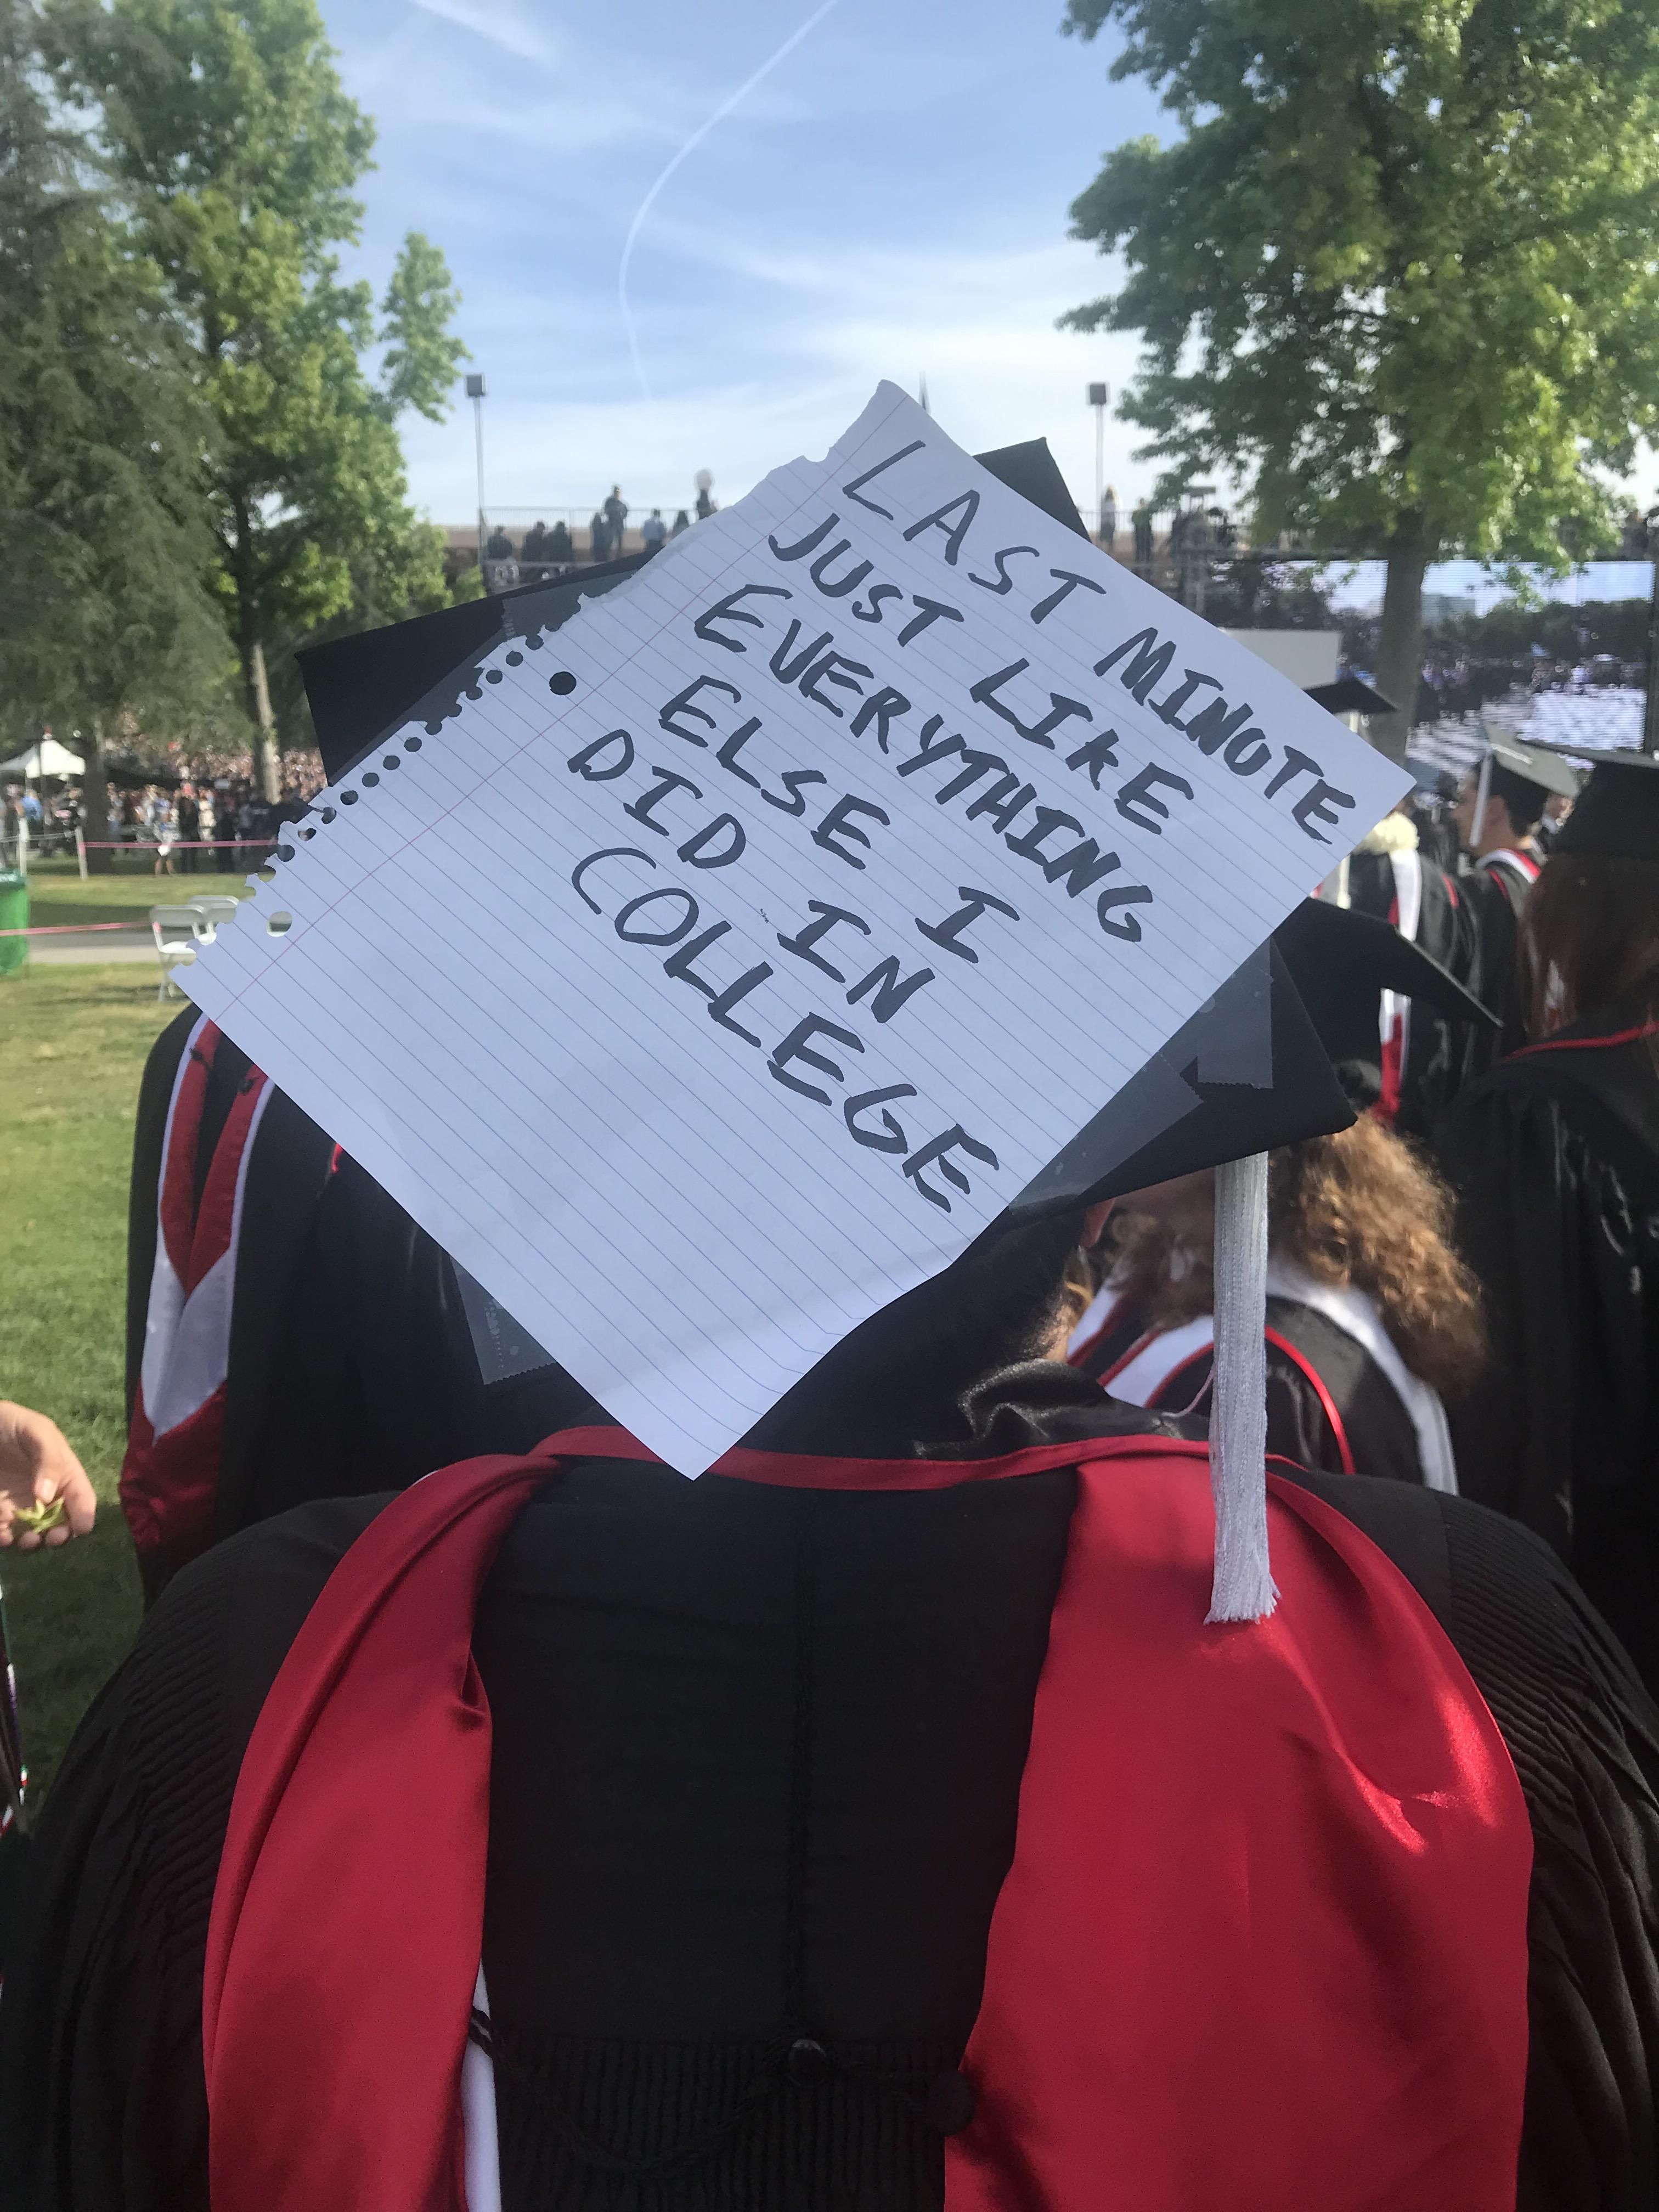 Graduated yesterday. In a see of decorates caps, this was my fave :)